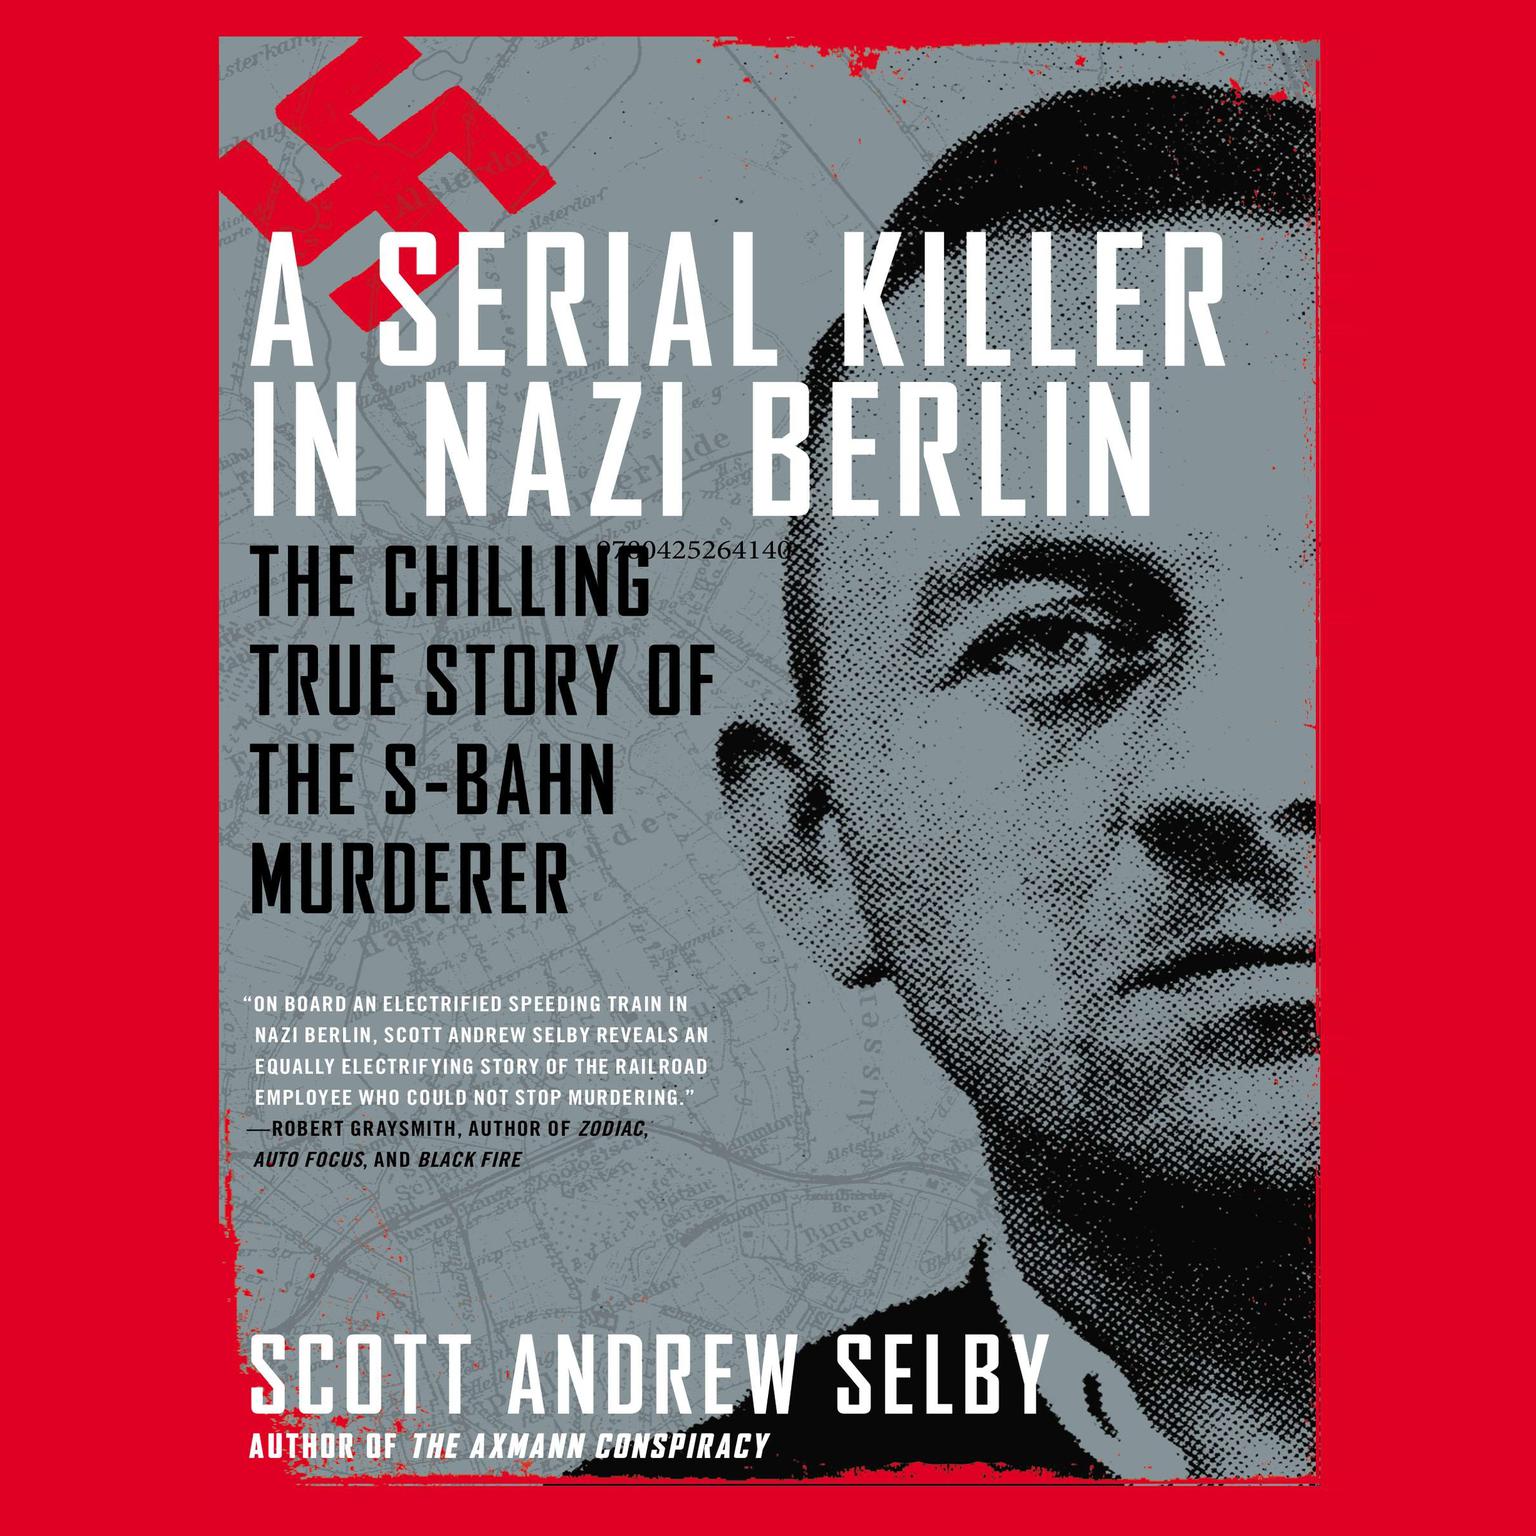 A Serial Killer in Nazi Berlin: The Chilling True Story of the S-Bahn Murderer Audiobook, by Scott Andrew Selby